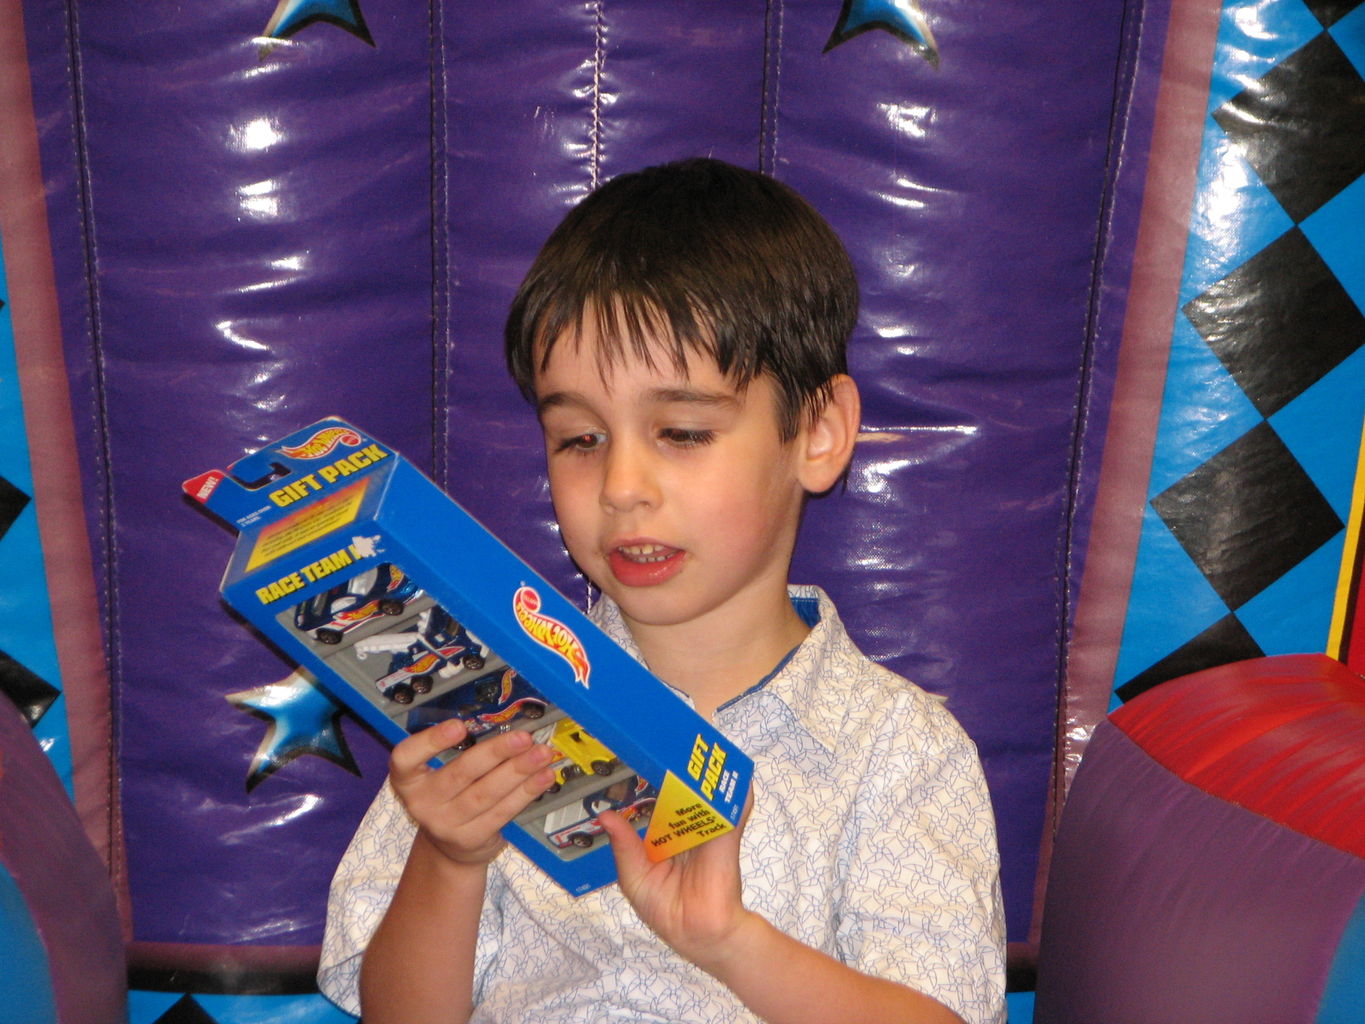 James 6th Birthday Party